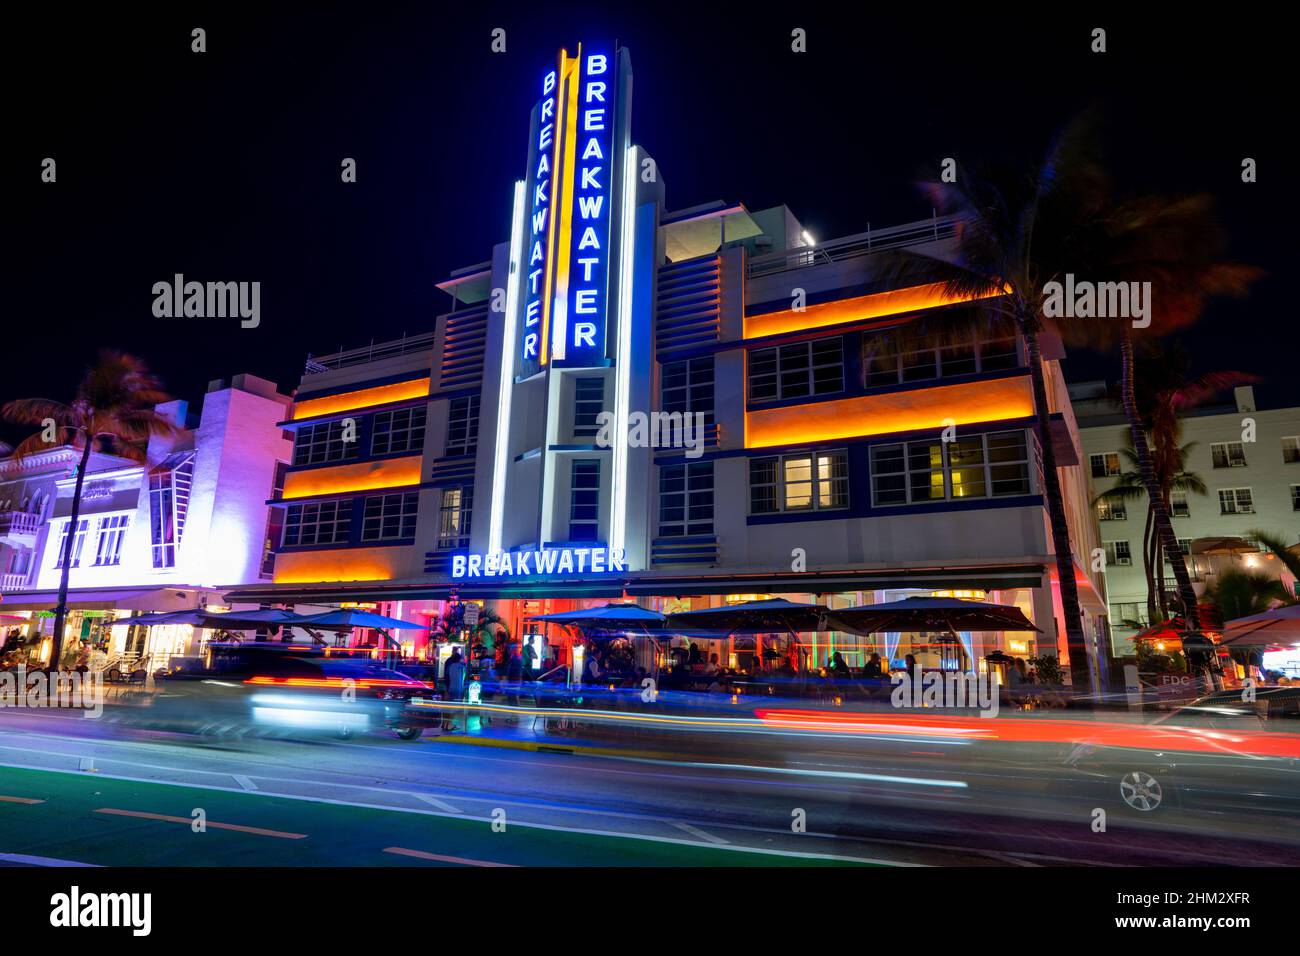 Miami Beach, FL, USA - February 2, 2022: Night photo of the Breakwater hotel with car light trails passing in front Stock Photo